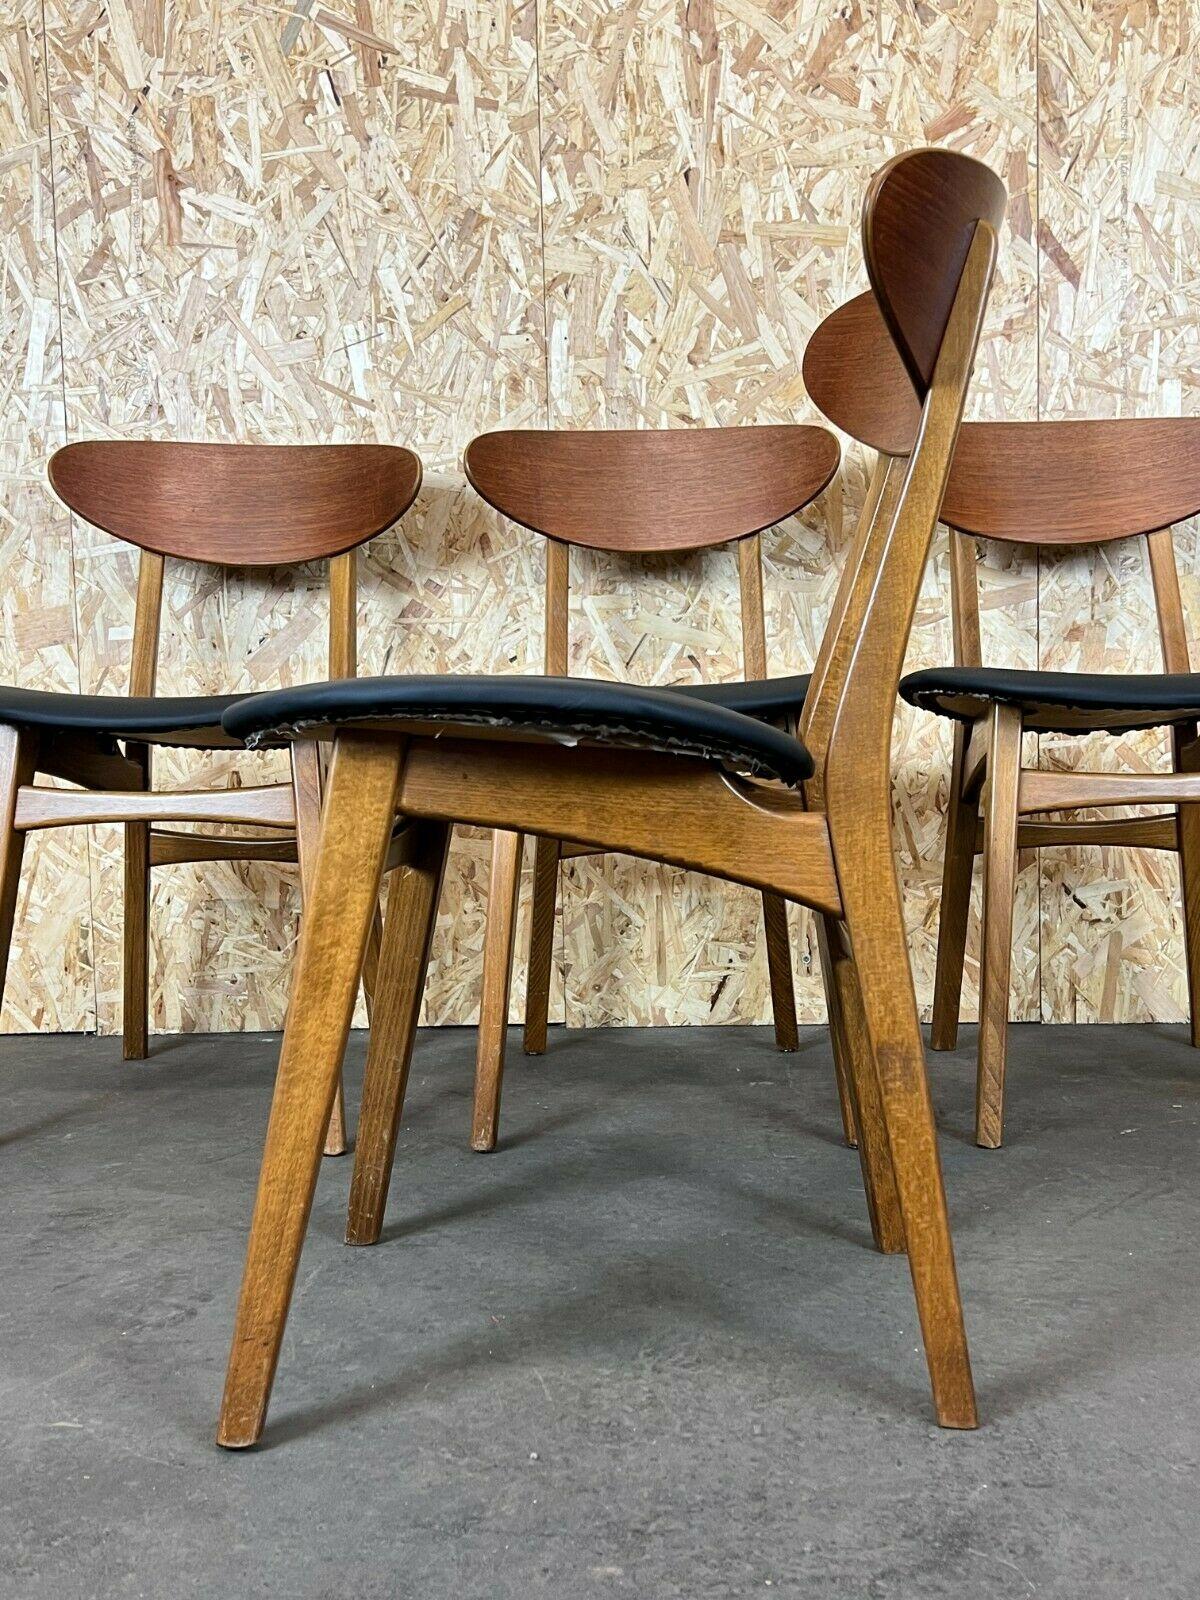 4x 60s 70s Teak Chairs Dining Chair Danish Modern Design 60s For Sale 2